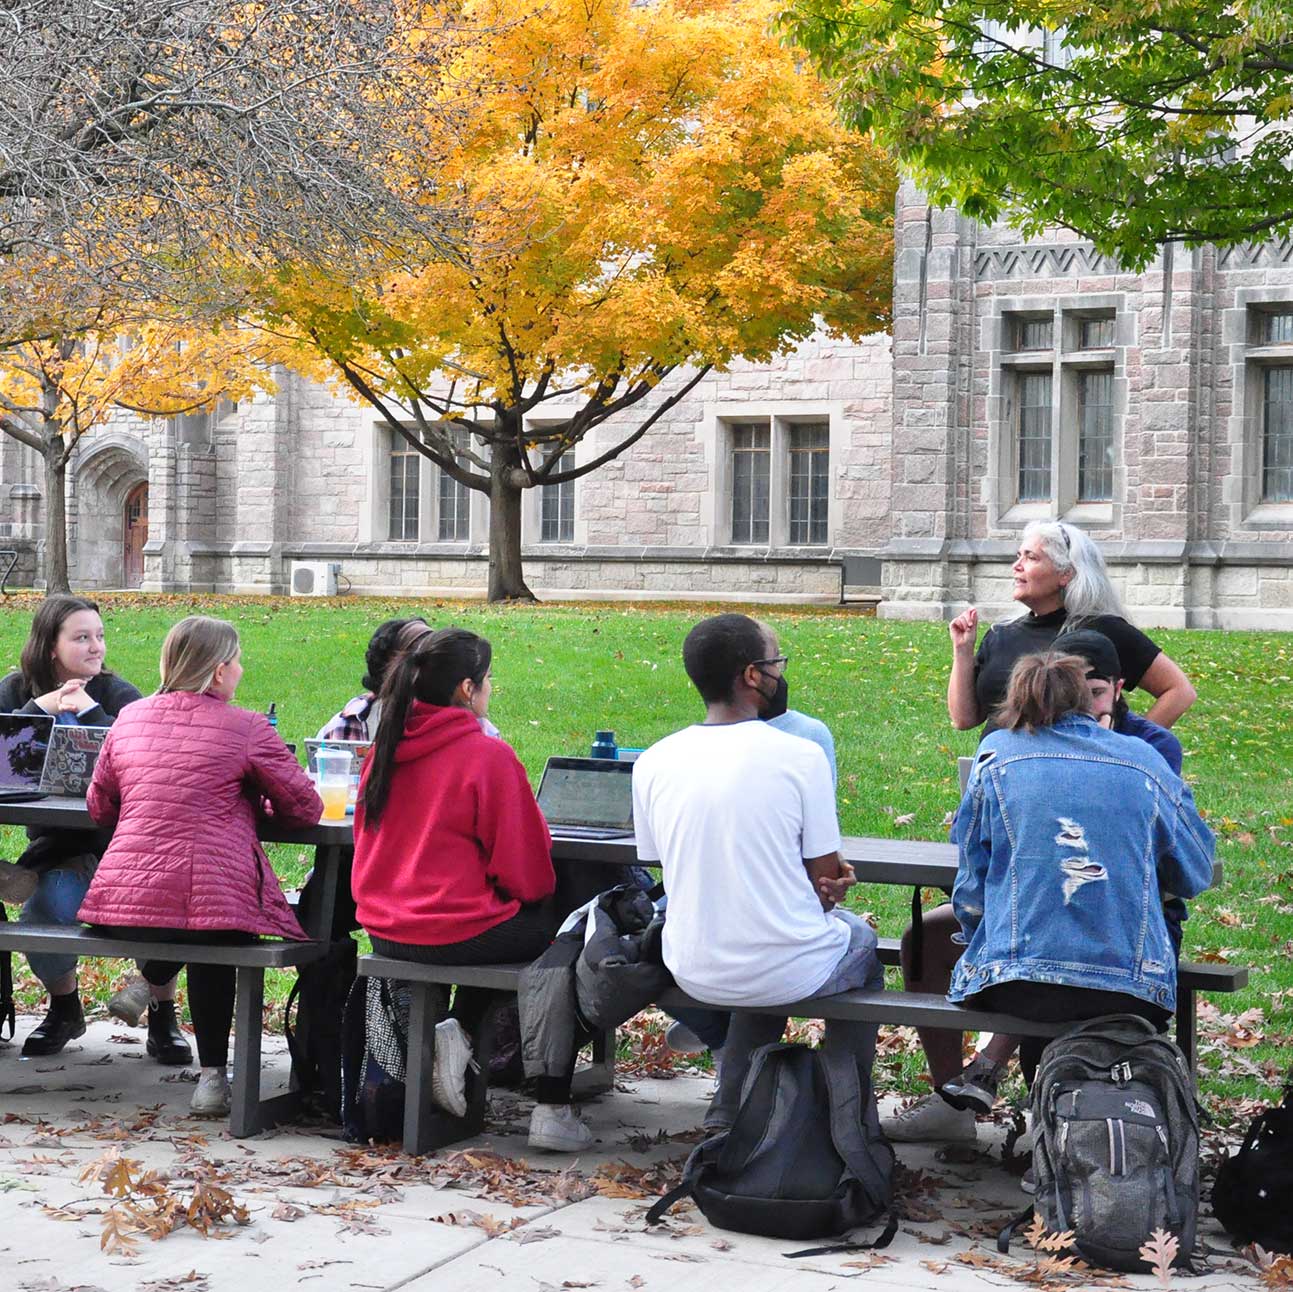 students outside on picnic table being taught by woman with grey hair